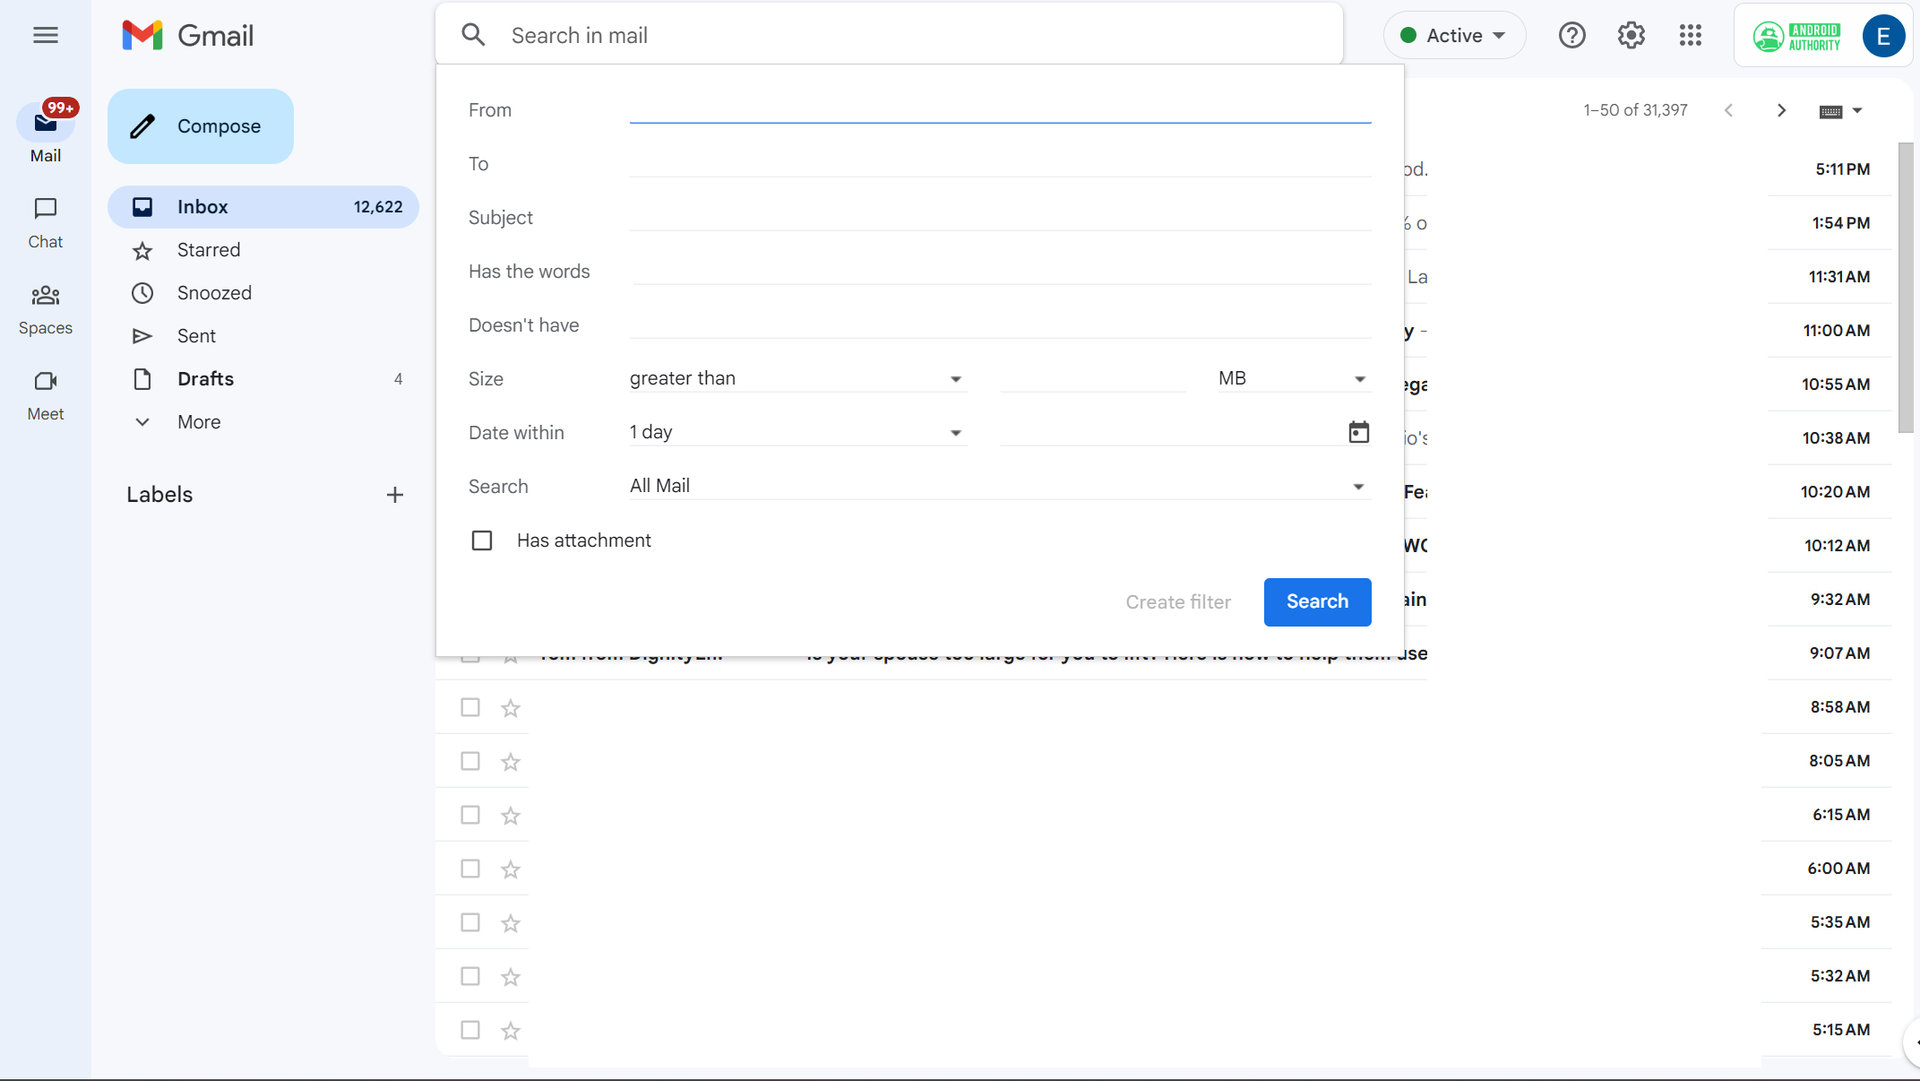 Search and filter emails in Gmail